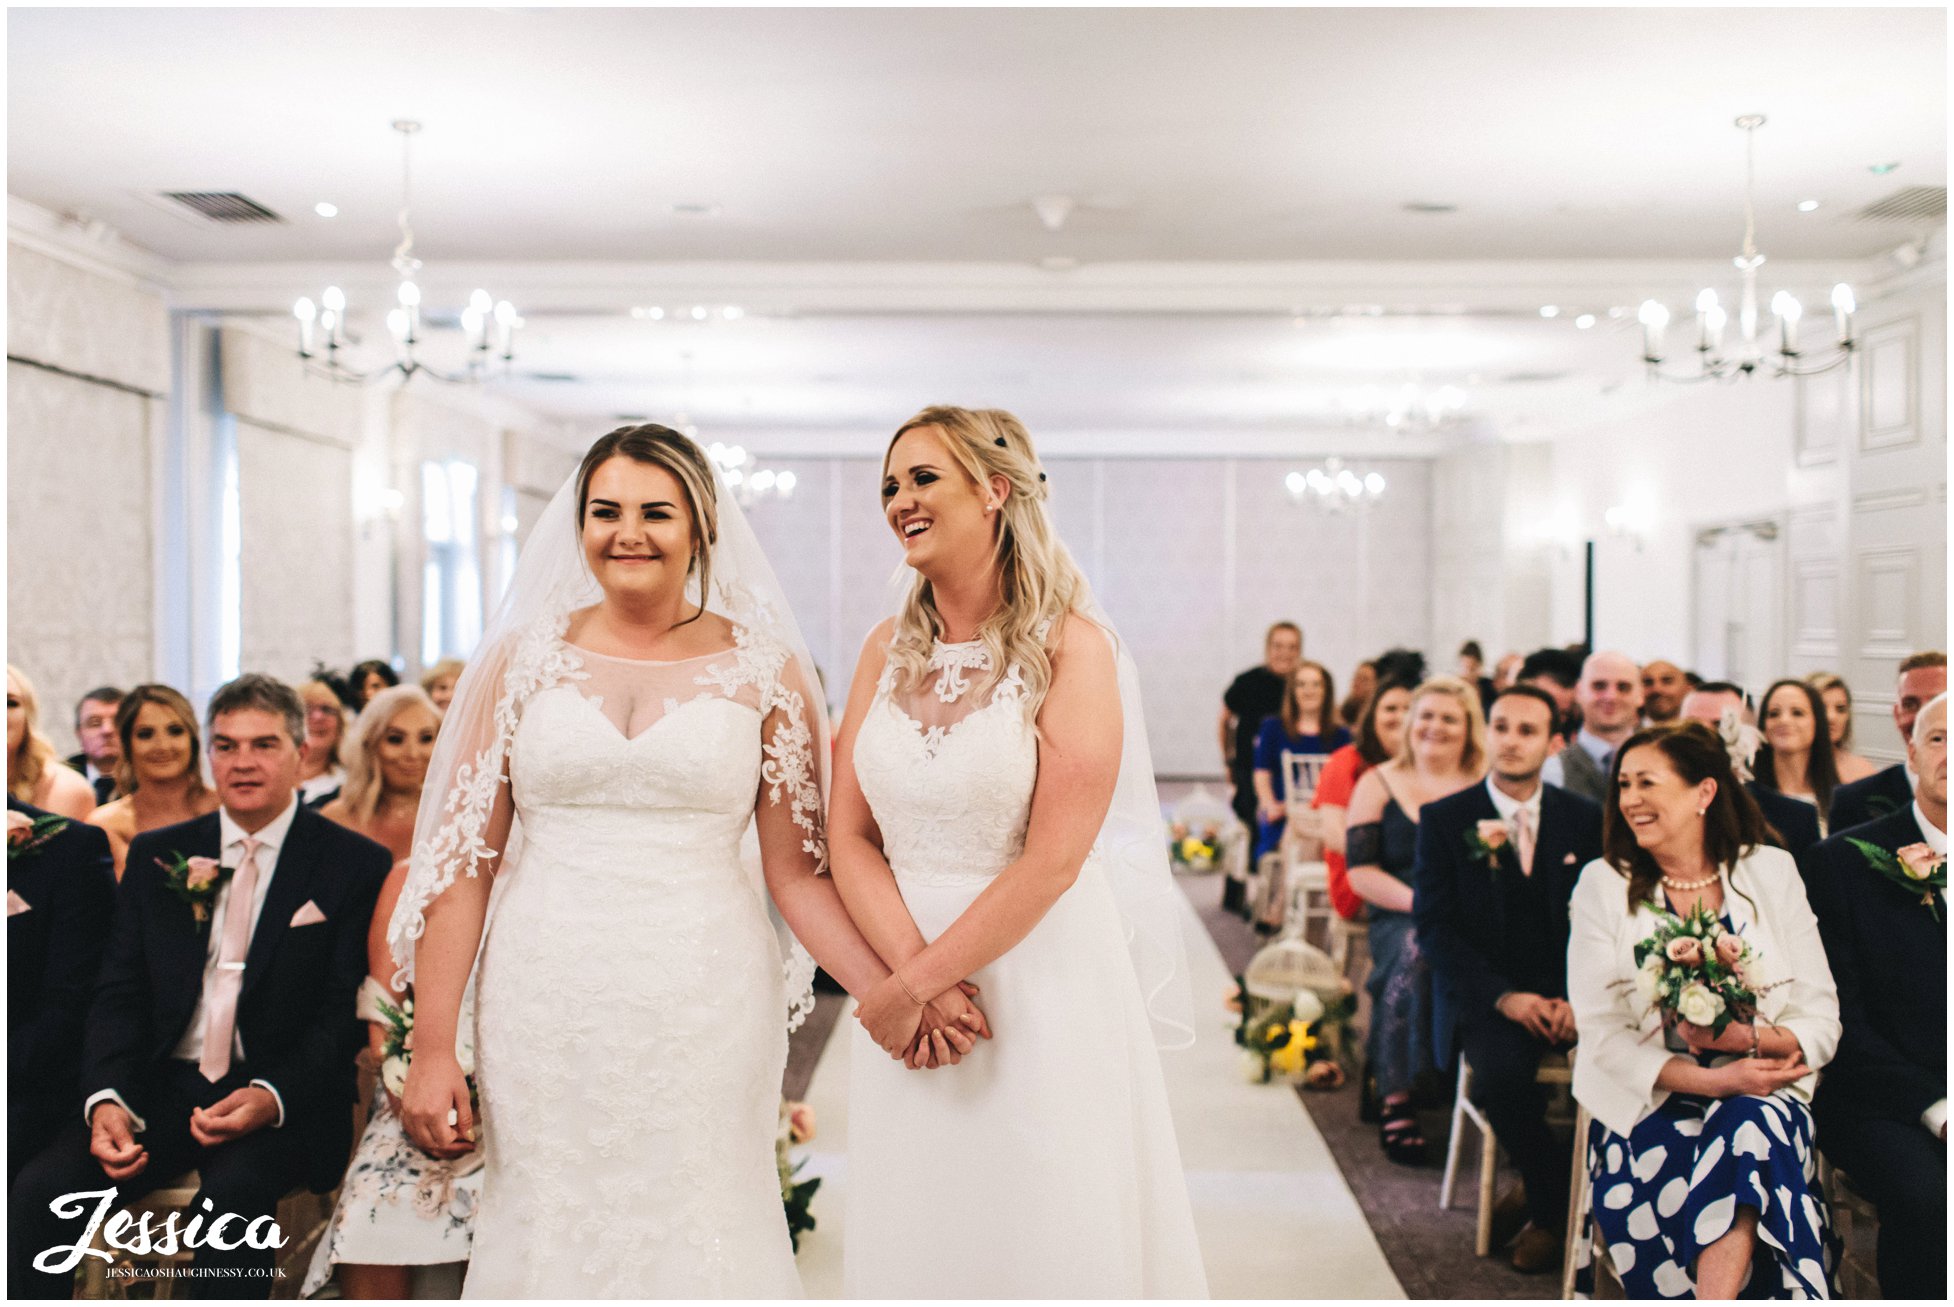 the brides laugh during their wedding ceremony in cheshire